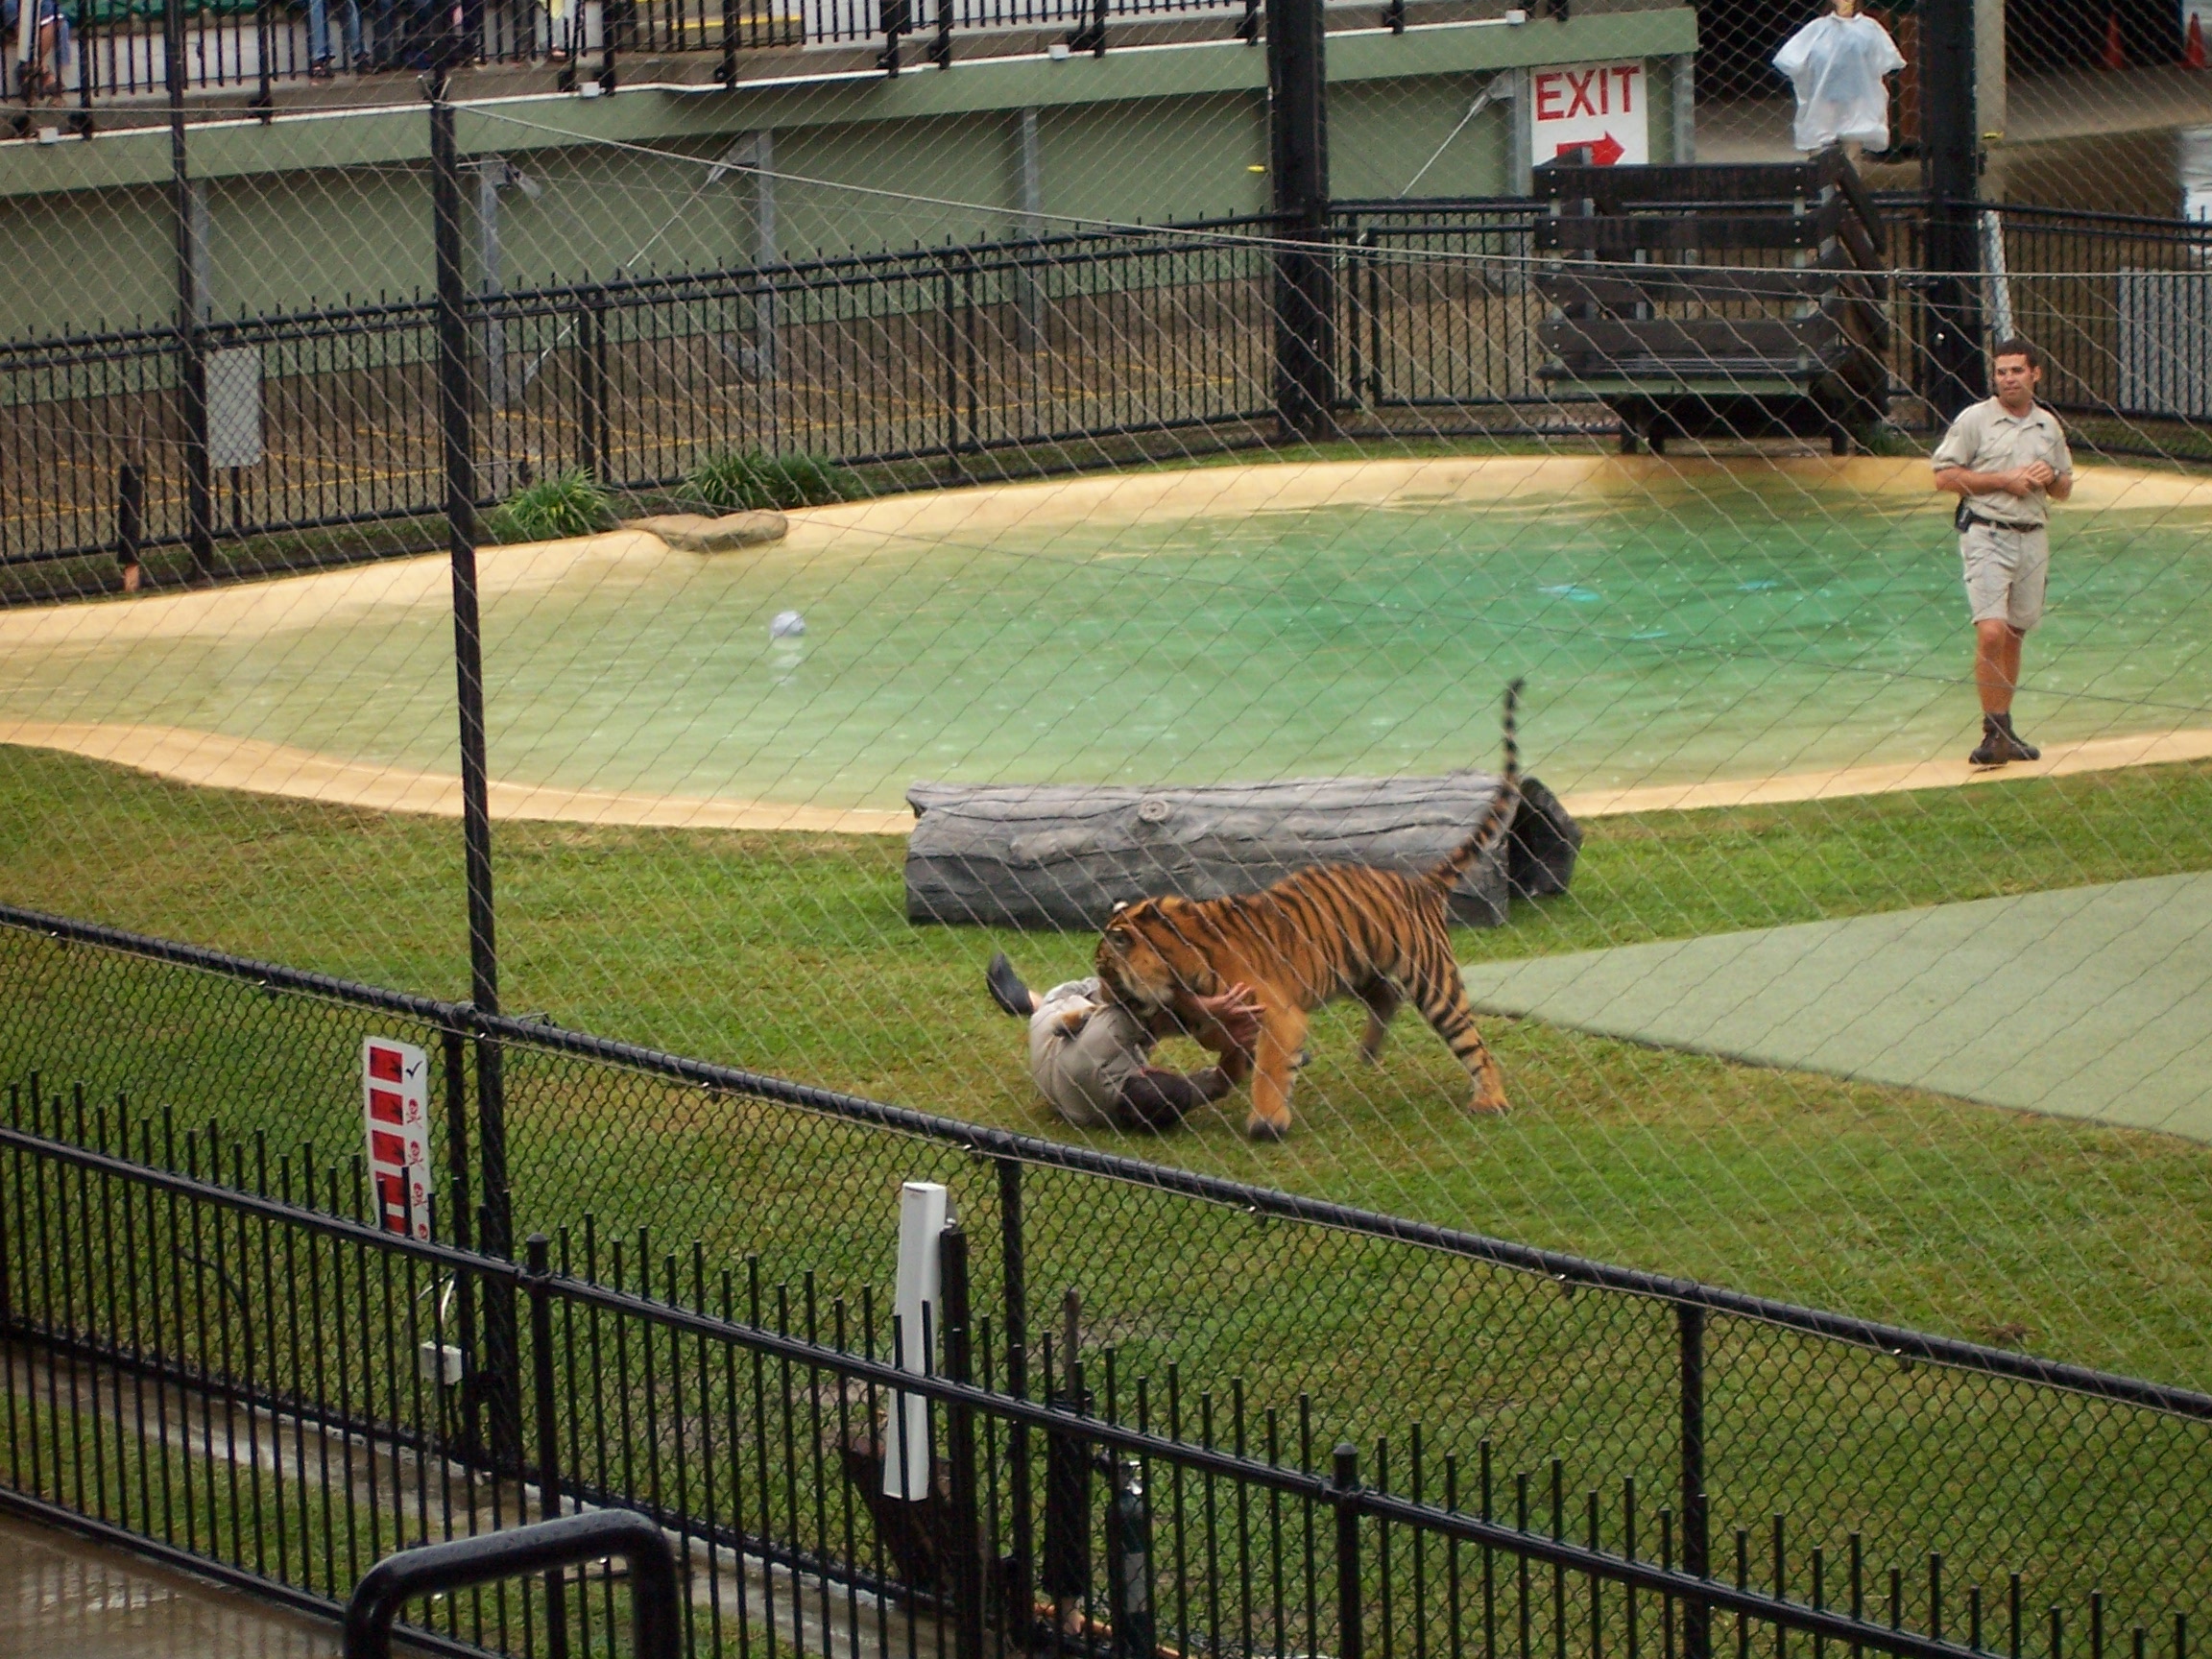 Tigers at Brisbane Zoo. Watch that man getting eaten. Well he actually wasn't.